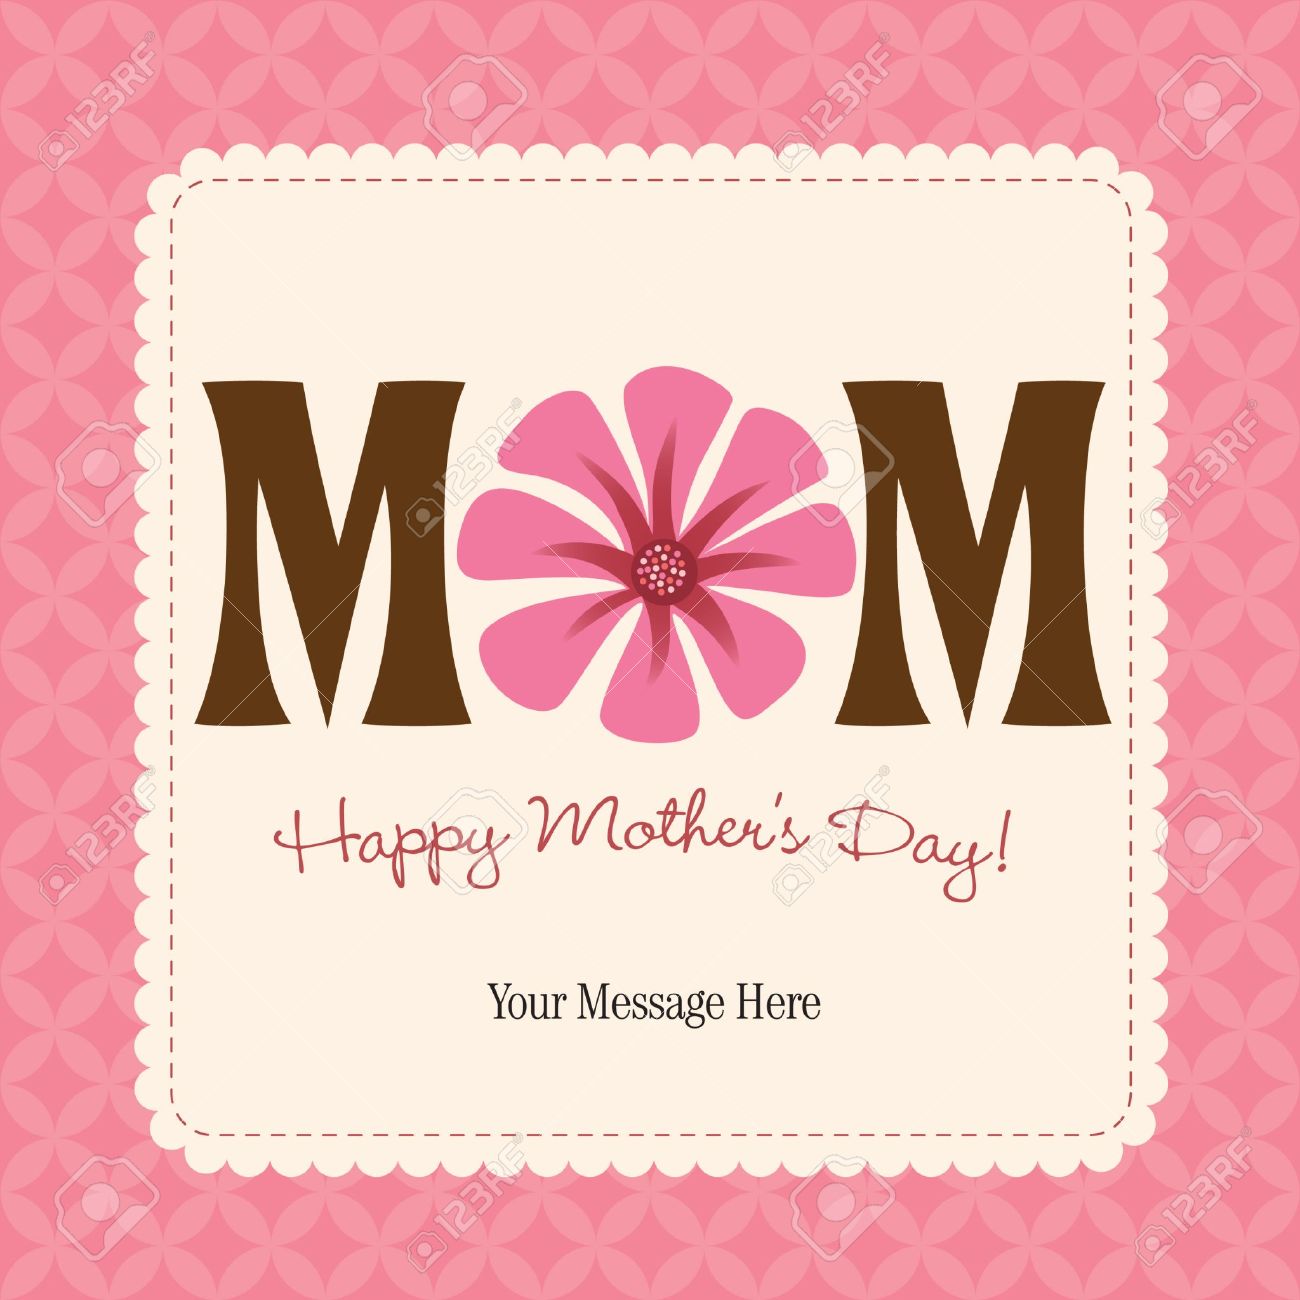 Mothers Day Background 3 - Mothers Day 8 May 2016